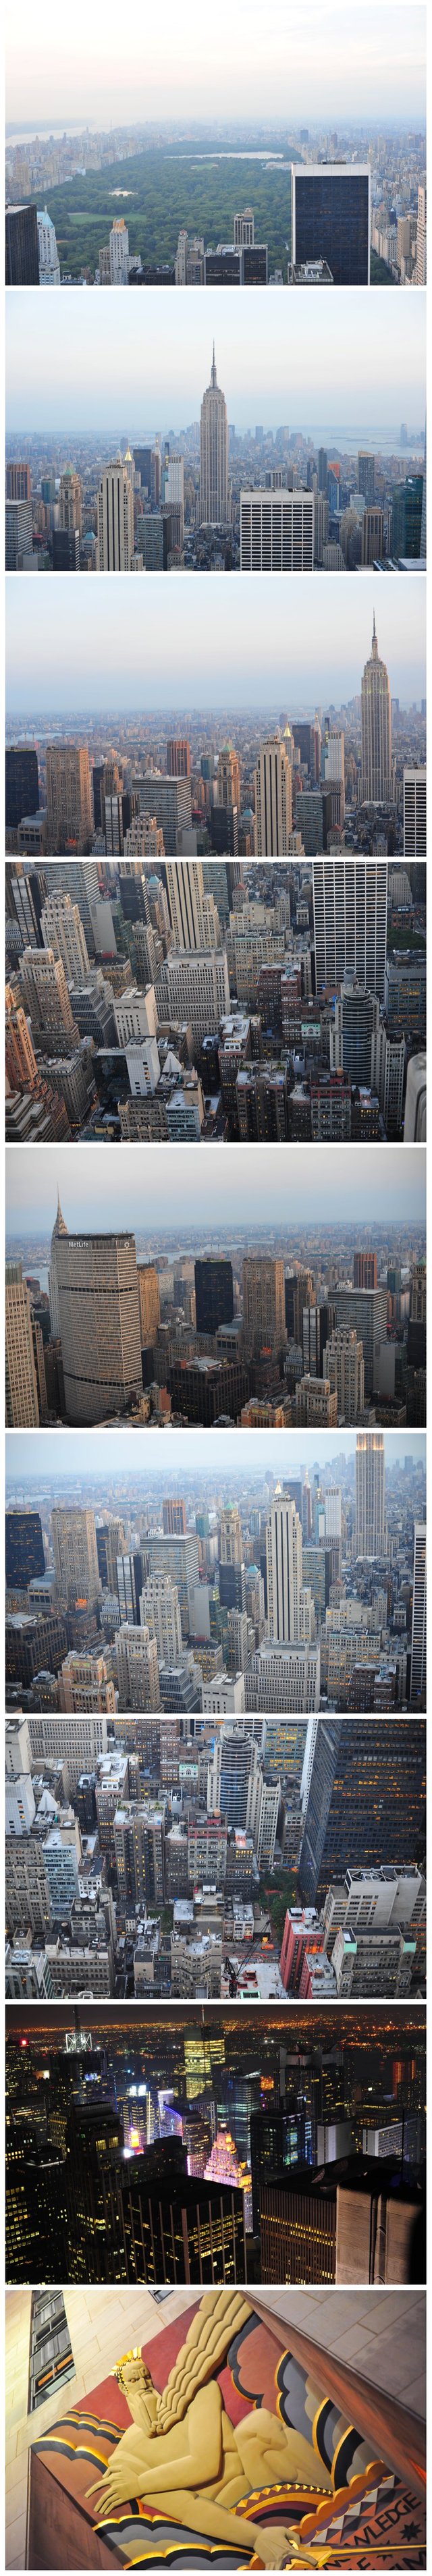 3-top-of-the-rock-nyc-picture-3